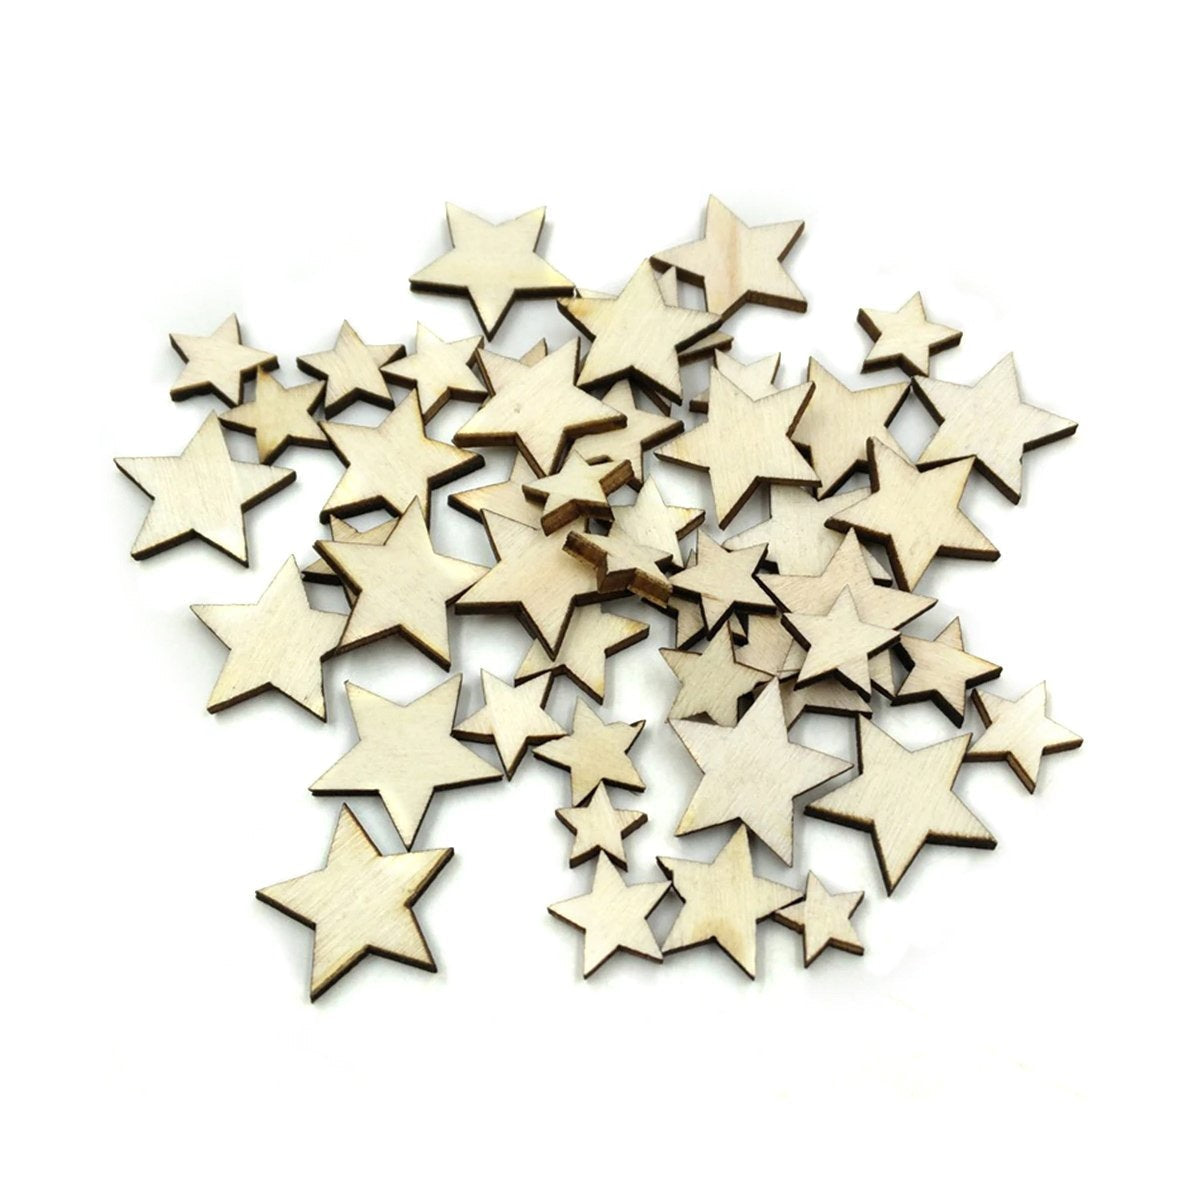 200pcs Wooden Stars Small Confetti 10mm-20mm Wood Crafts Decorations Table Scatter